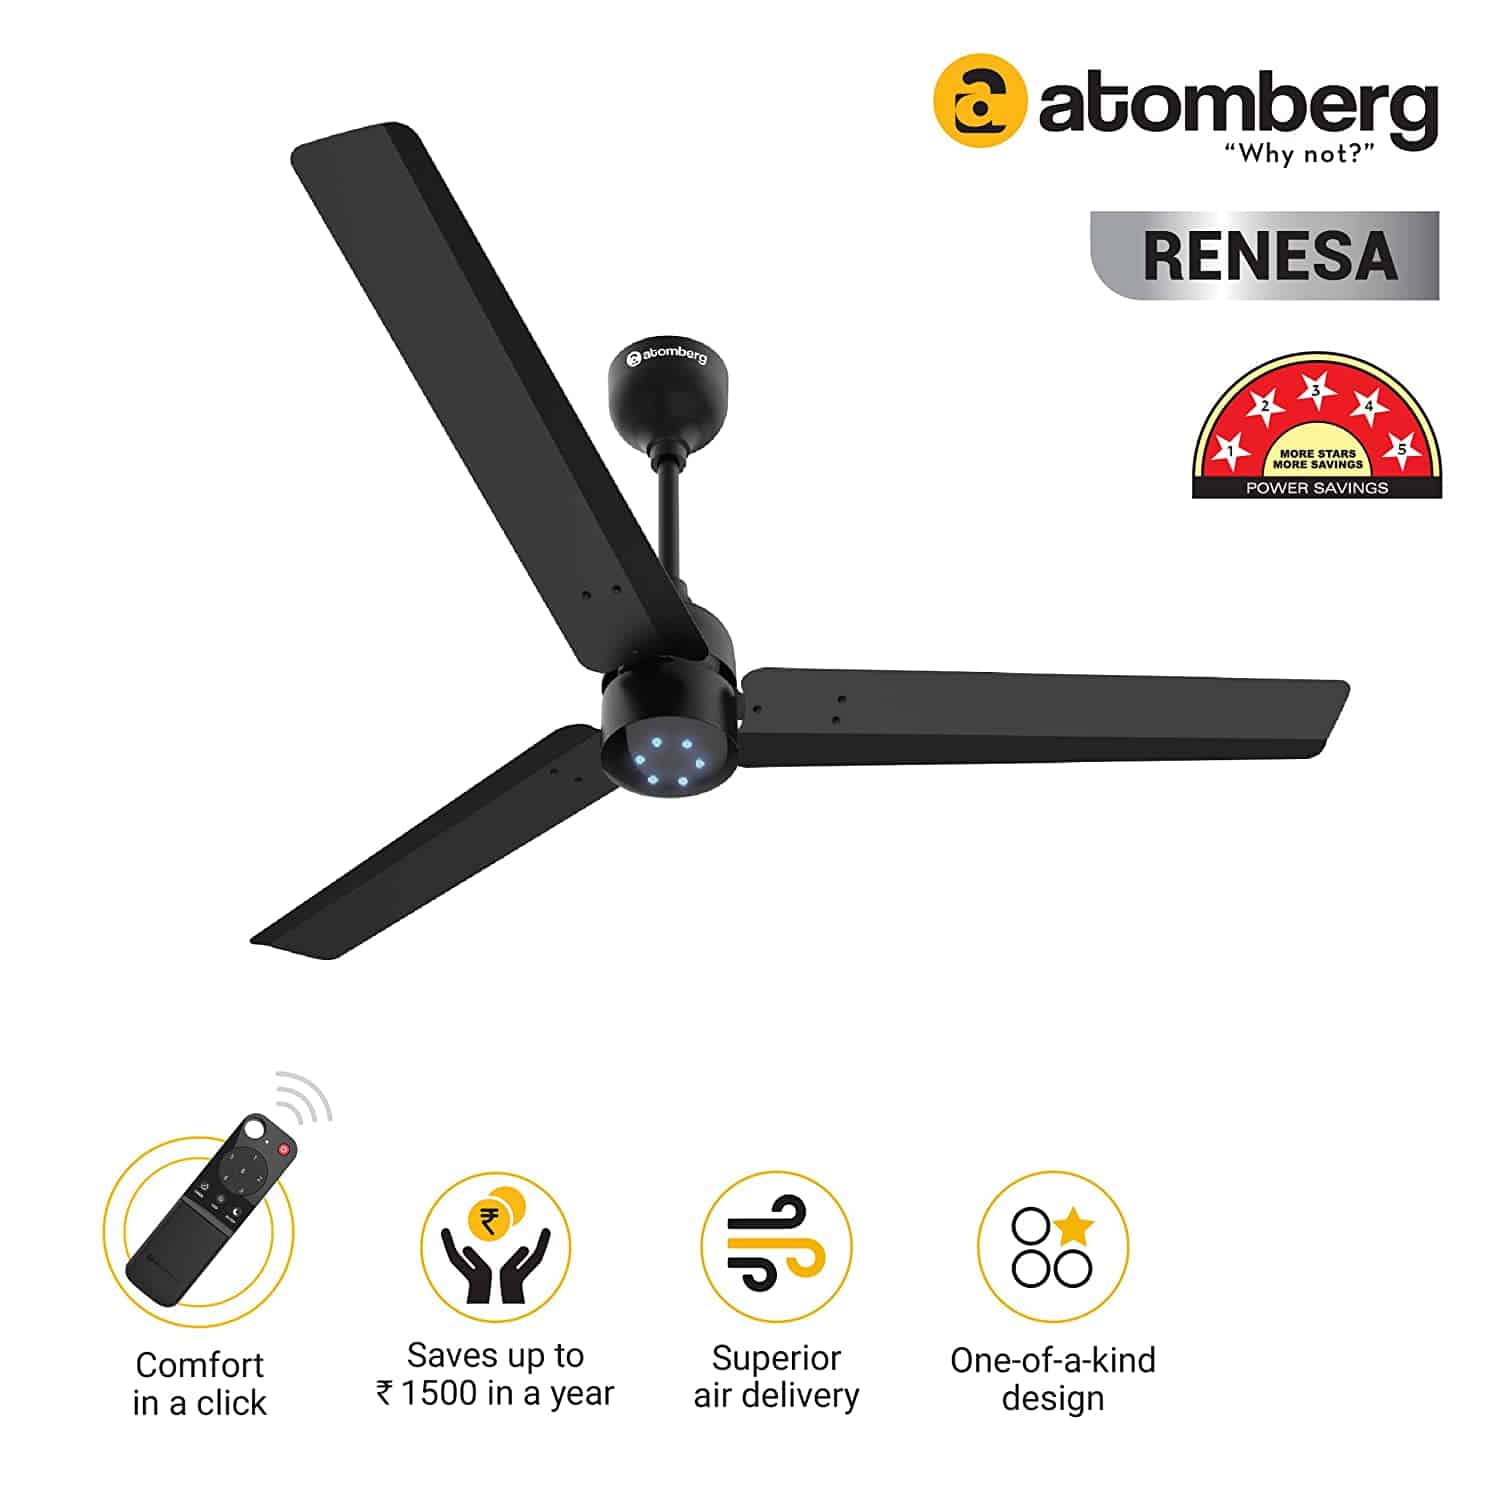 Atomberg Renesa 1200mm BLDC Motor 5 Star Rated Ceiling Fans for Home with Remote Control | Upto 65% Energy Saving High Speed Fan with LED Lights | 2+1 Year Warranty (Matt Black)